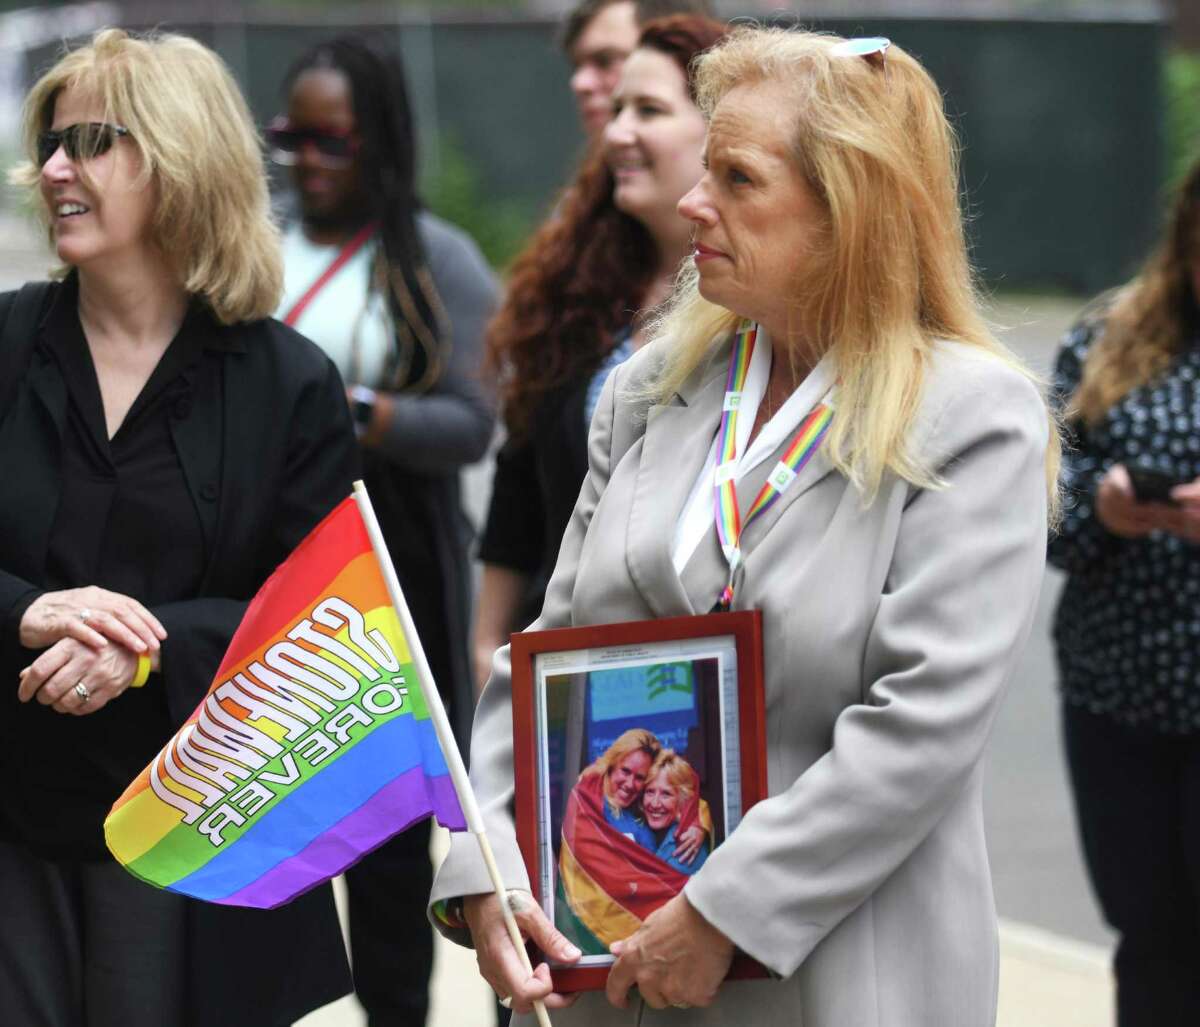 Stamford resident Maureen Boylan holds a photo of her and her wife, Barbara LeCournec, during the Pride Month flag raising outside the Government Center in Stamford, Conn. Thursday, June 2, 2022. Stamford Mayor Caroline Simmons joined Stamford Pride outside the Government Center to raise a rainbow flag kicking off LGBTQ+ Pride Month.